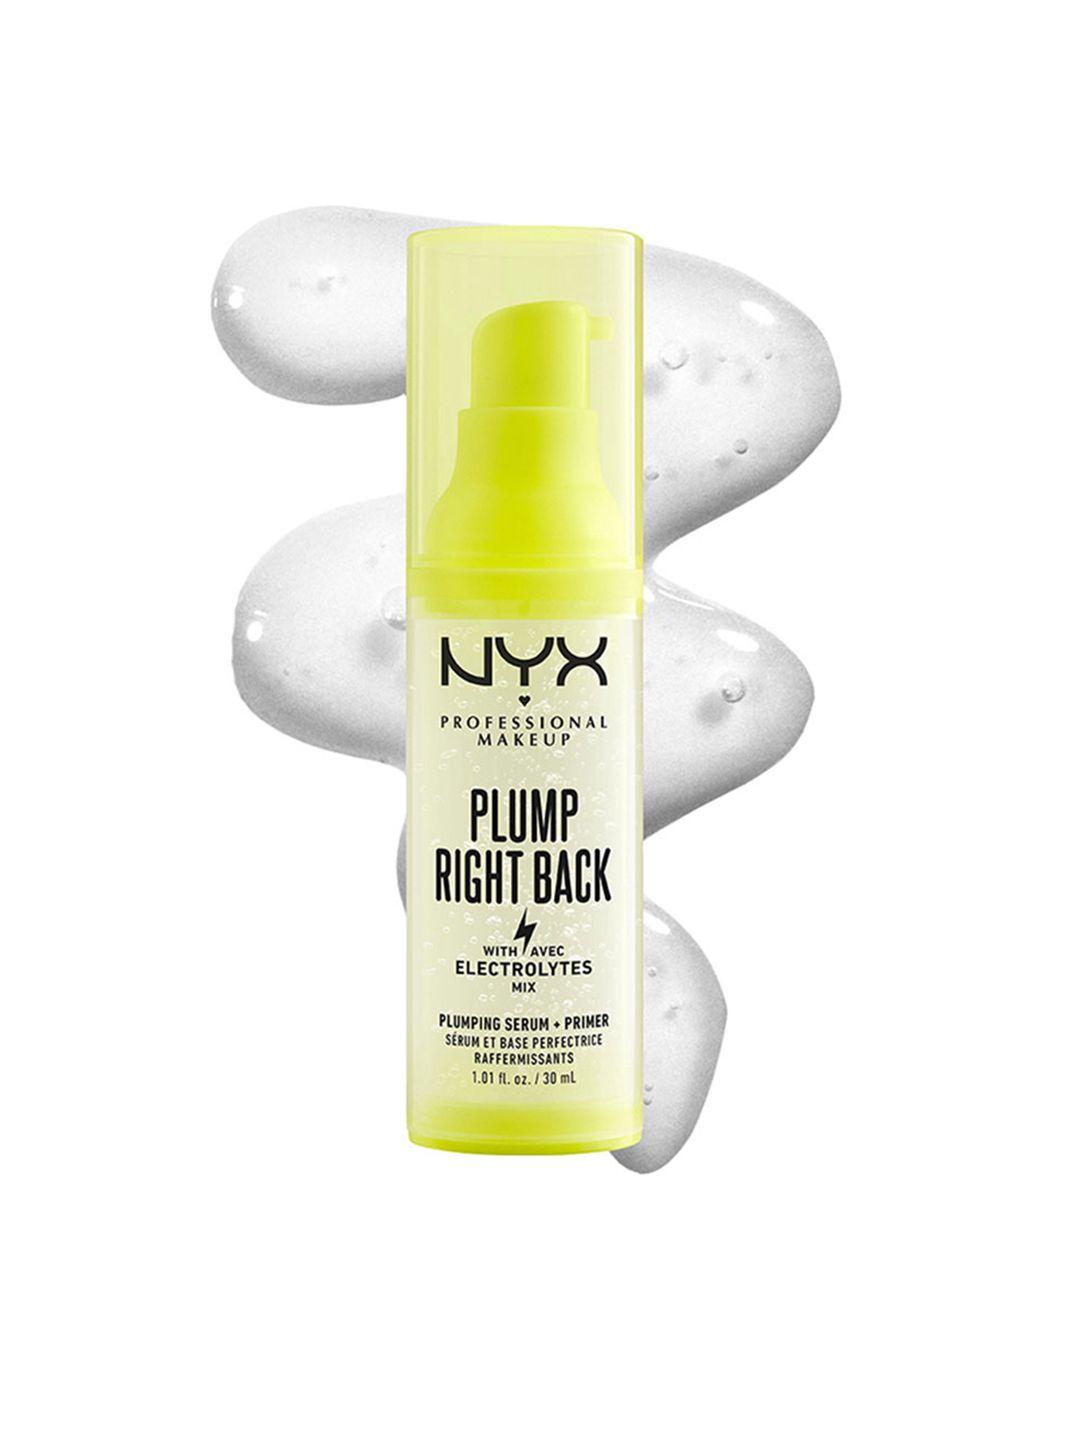 nyx professional makeup plump right back plumping serum + primer with electrolytes - 30 ml